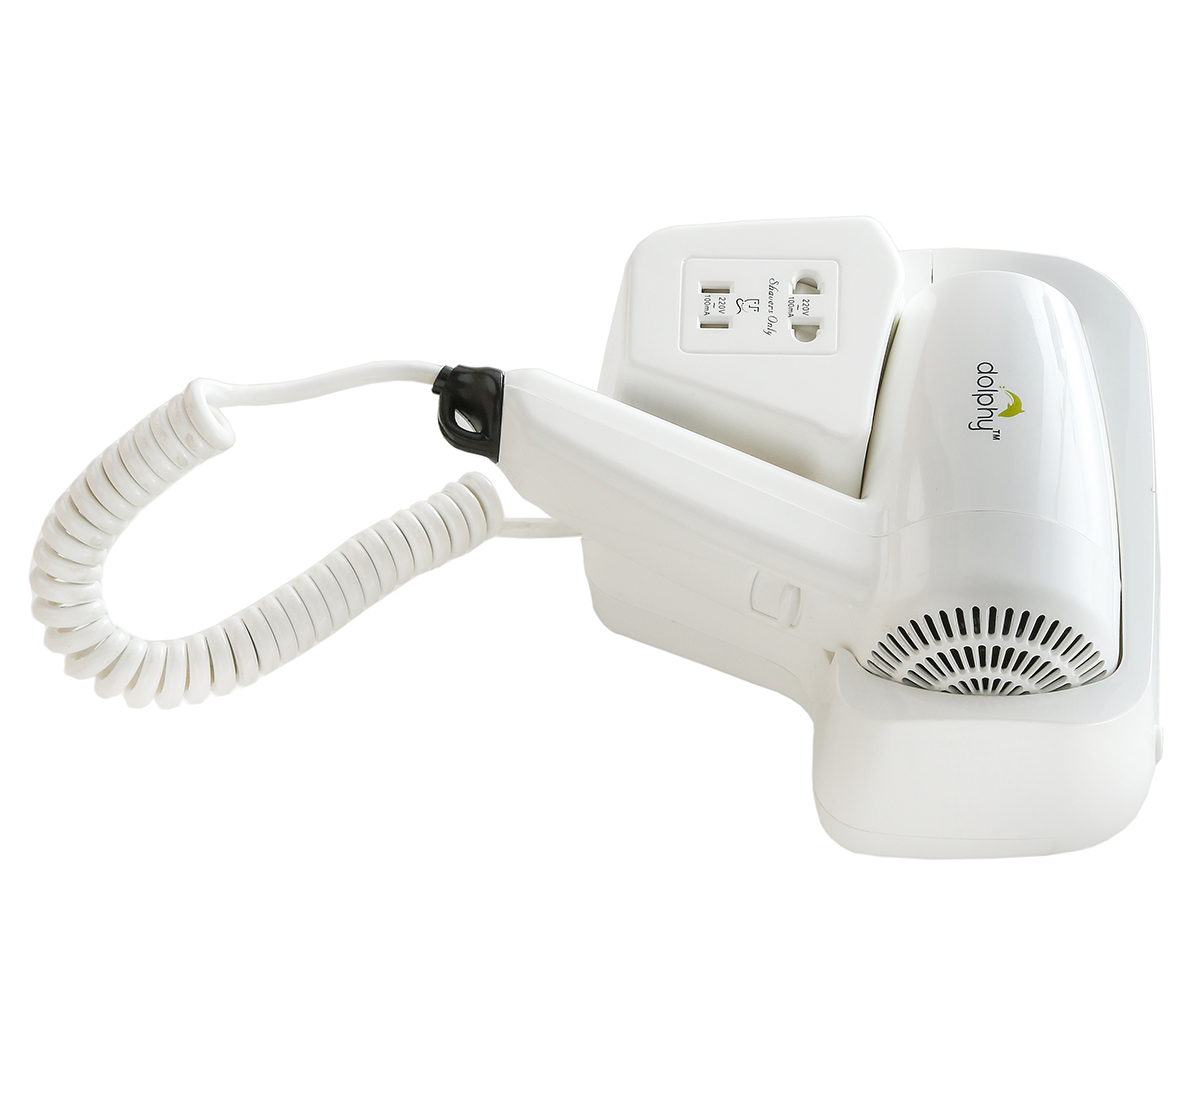 White ABS Professional Hair Dryer 1200 W
